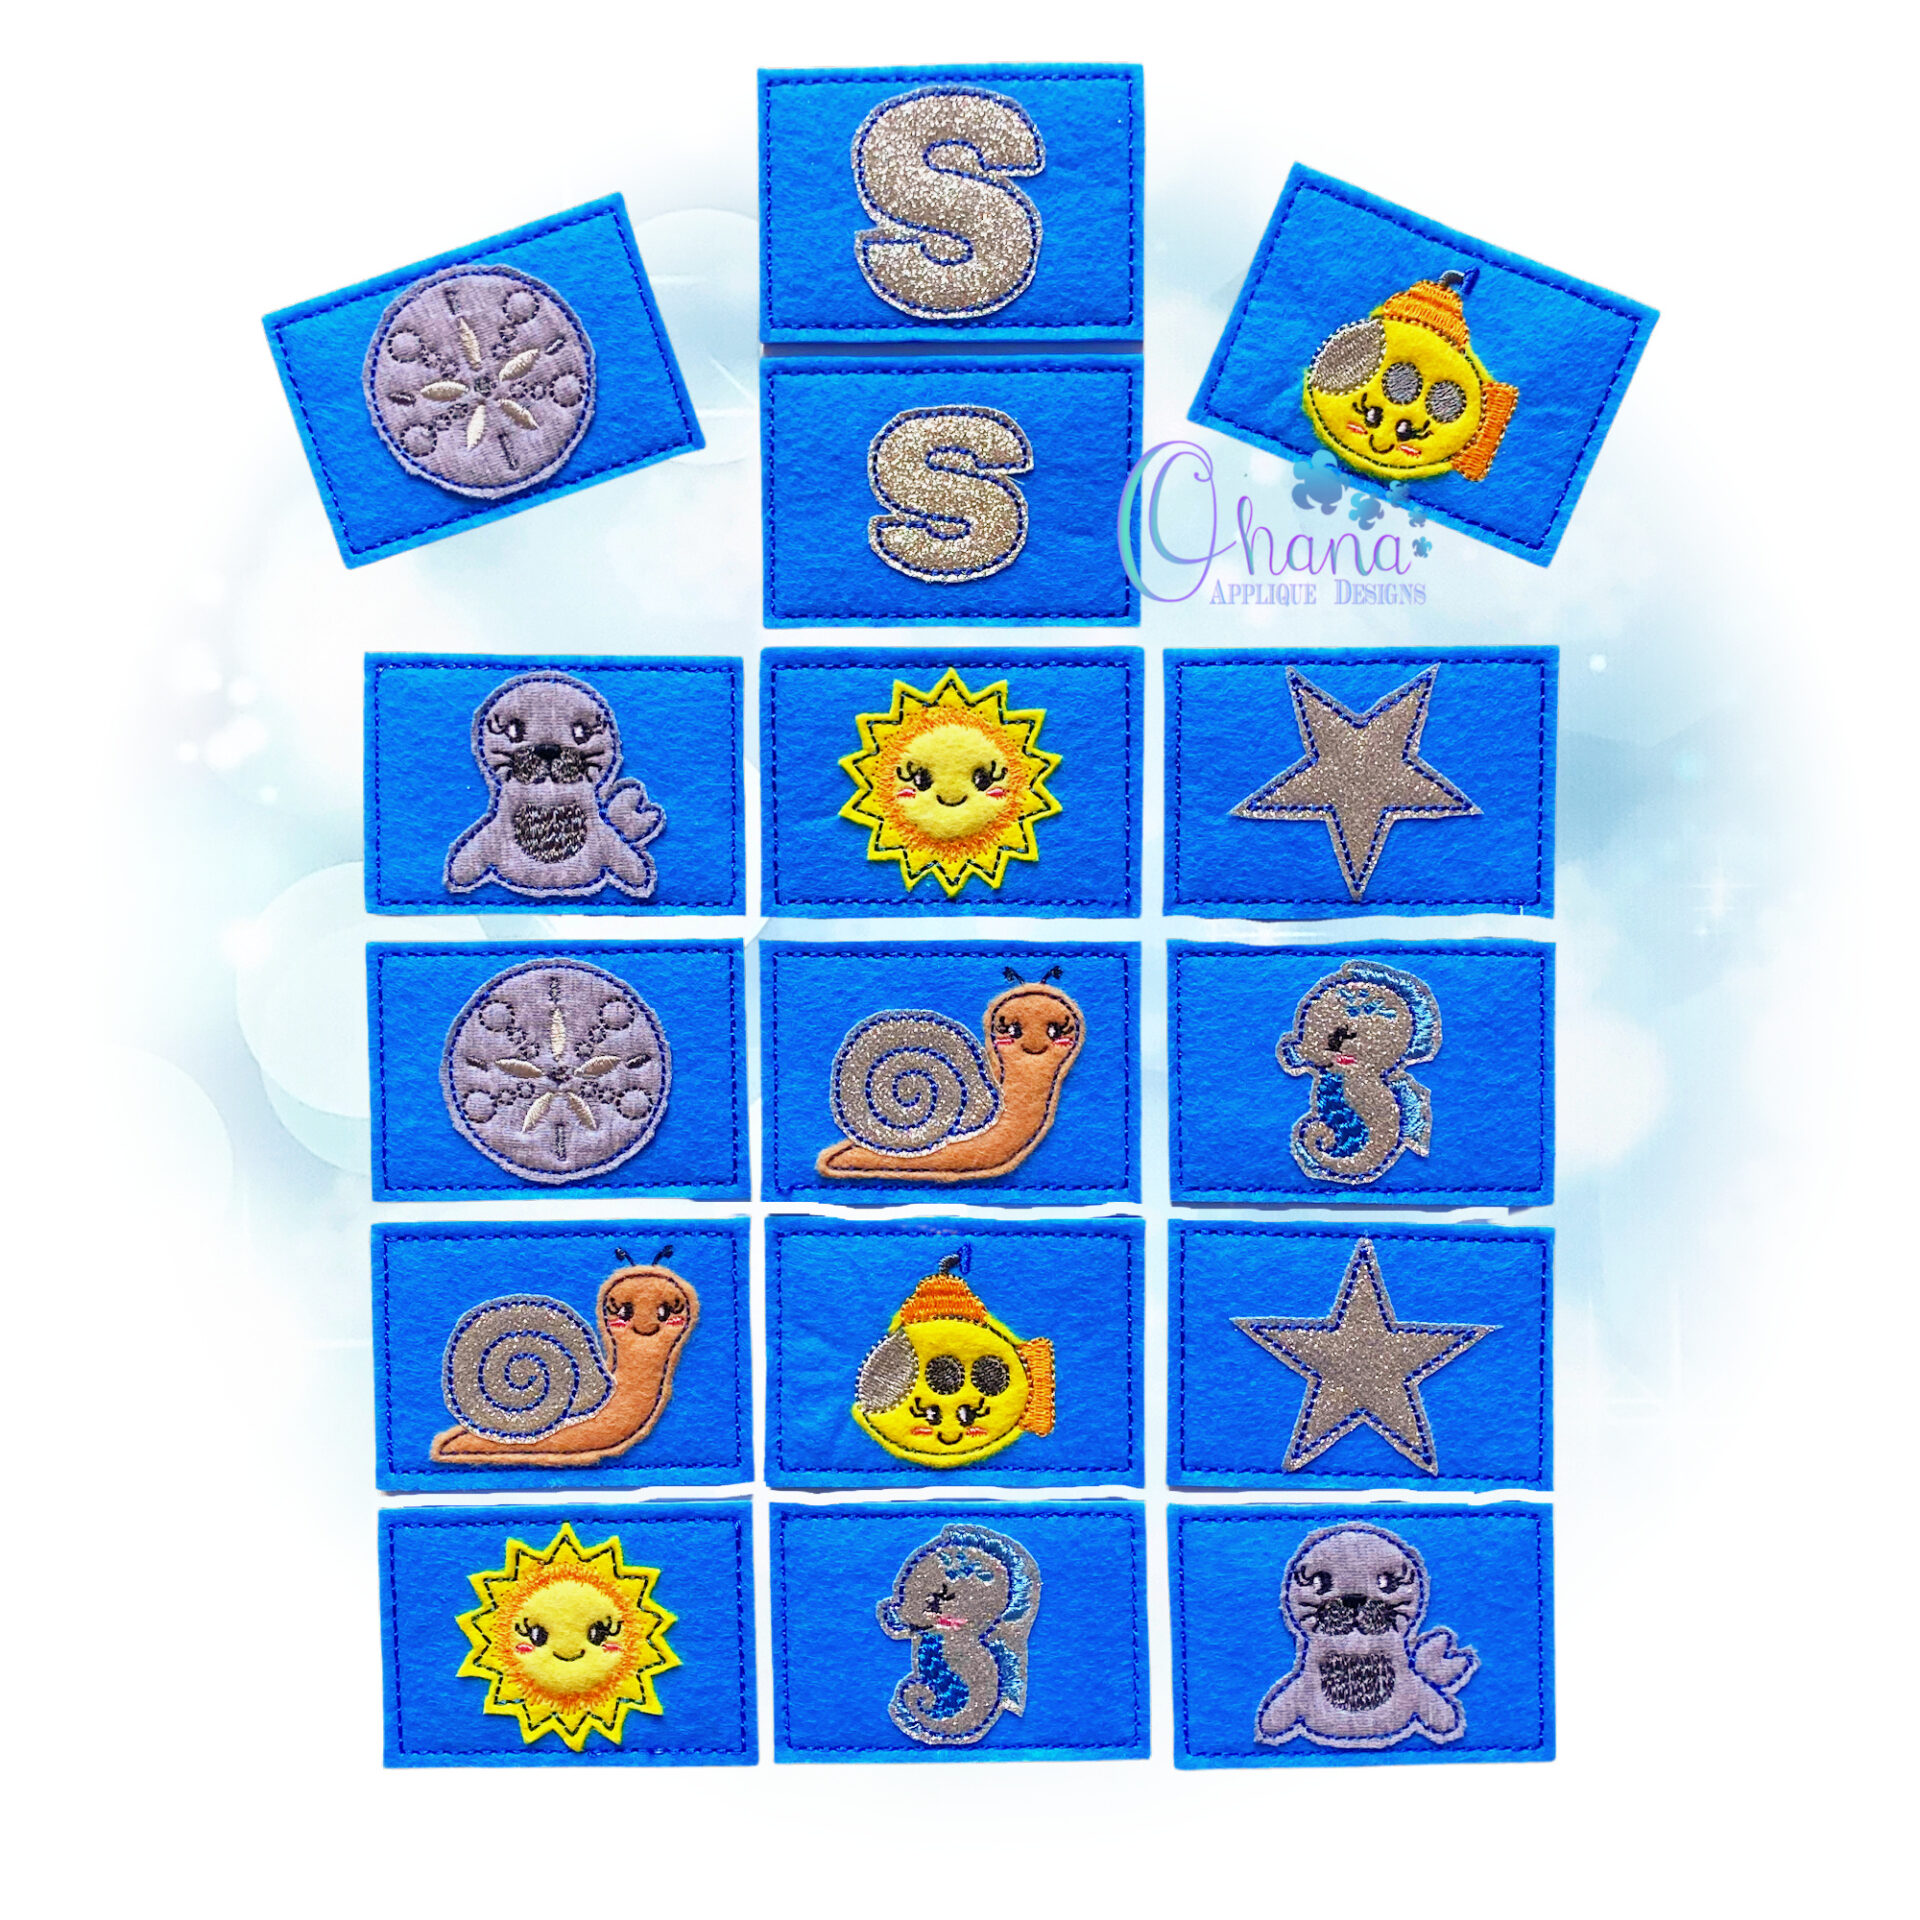 Letter S Matching Card Game